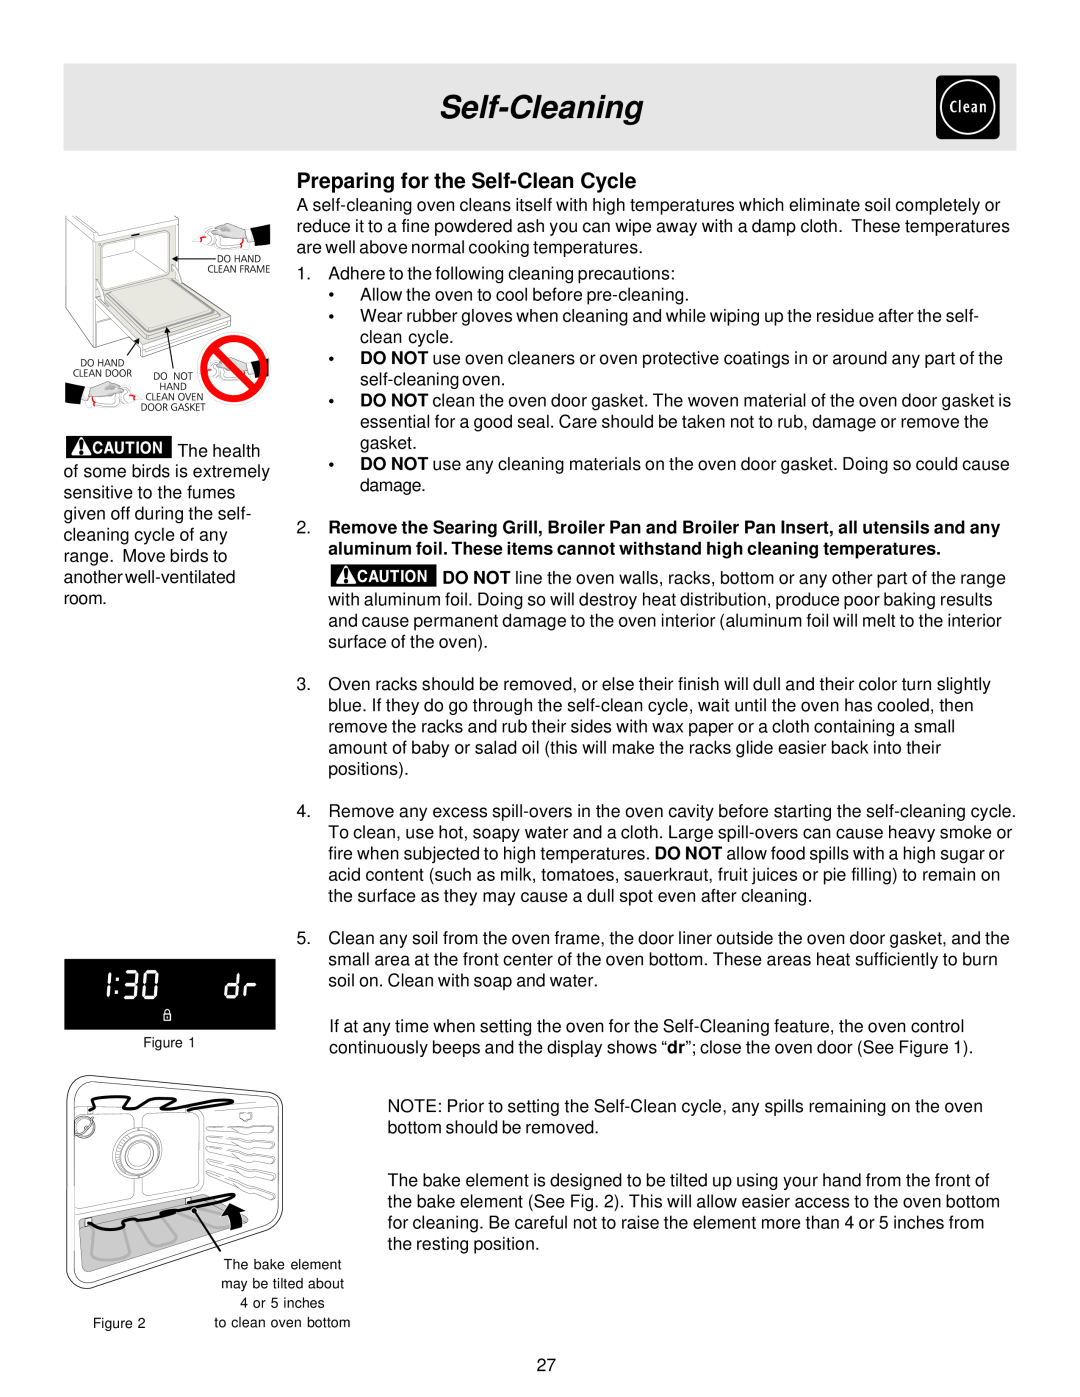 Frigidaire 316257124, ES40 manual Self-Cleaning, Preparing for the Self-Clean Cycle 